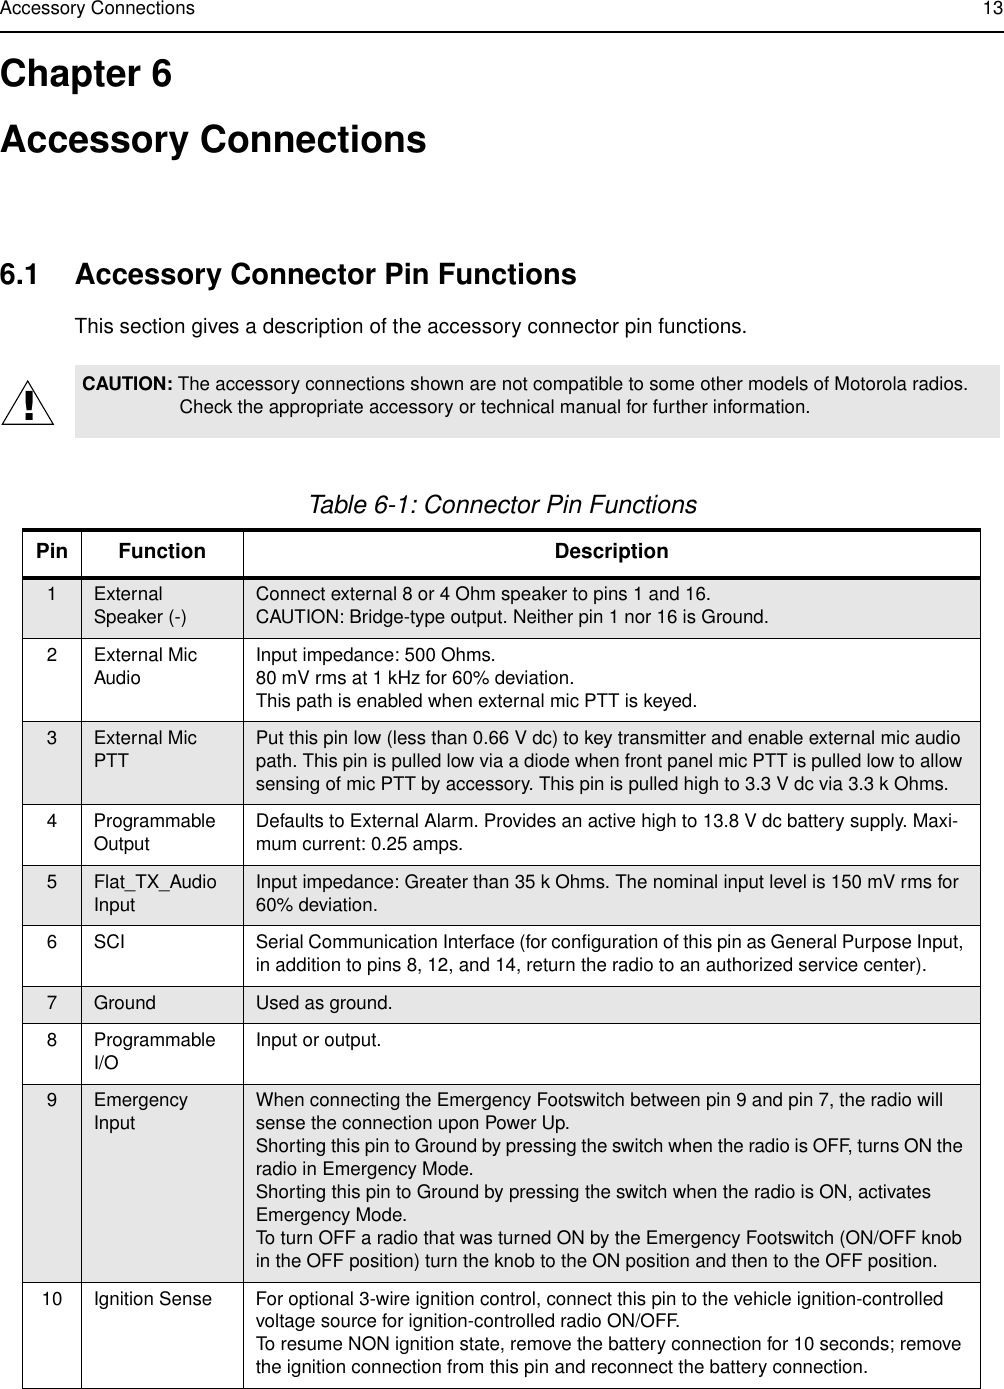 Accessory Connections 13Chapter 6Accessory Connections6.1 Accessory Connector Pin FunctionsThis section gives a description of the accessory connector pin functions.CAUTION: The accessory connections shown are not compatible to some other models of Motorola radios. Check the appropriate accessory or technical manual for further information.Table 6-1: Connector Pin FunctionsPin Function Description1External Speaker (-) Connect external 8 or 4 Ohm speaker to pins 1 and 16.CAUTION: Bridge-type output. Neither pin 1 nor 16 is Ground.2 External Mic Audio Input impedance: 500 Ohms.80 mV rms at 1 kHz for 60% deviation.This path is enabled when external mic PTT is keyed.3External Mic PTT Put this pin low (less than 0.66 V dc) to key transmitter and enable external mic audio path. This pin is pulled low via a diode when front panel mic PTT is pulled low to allow sensing of mic PTT by accessory. This pin is pulled high to 3.3 V dc via 3.3 k Ohms.4 Programmable Output Defaults to External Alarm. Provides an active high to 13.8 V dc battery supply. Maxi-mum current: 0.25 amps. 5Flat_TX_Audio Input Input impedance: Greater than 35 k Ohms. The nominal input level is 150 mV rms for 60% deviation.6 SCI Serial Communication Interface (for configuration of this pin as General Purpose Input, in addition to pins 8, 12, and 14, return the radio to an authorized service center).7Ground Used as ground.8 Programmable I/O Input or output.9Emergency Input When connecting the Emergency Footswitch between pin 9 and pin 7, the radio will sense the connection upon Power Up. Shorting this pin to Ground by pressing the switch when the radio is OFF, turns ON the radio in Emergency Mode.Shorting this pin to Ground by pressing the switch when the radio is ON, activates Emergency Mode.To turn OFF a radio that was turned ON by the Emergency Footswitch (ON/OFF knob in the OFF position) turn the knob to the ON position and then to the OFF position.10 Ignition Sense For optional 3-wire ignition control, connect this pin to the vehicle ignition-controlled voltage source for ignition-controlled radio ON/OFF.To resume NON ignition state, remove the battery connection for 10 seconds; remove the ignition connection from this pin and reconnect the battery connection.!